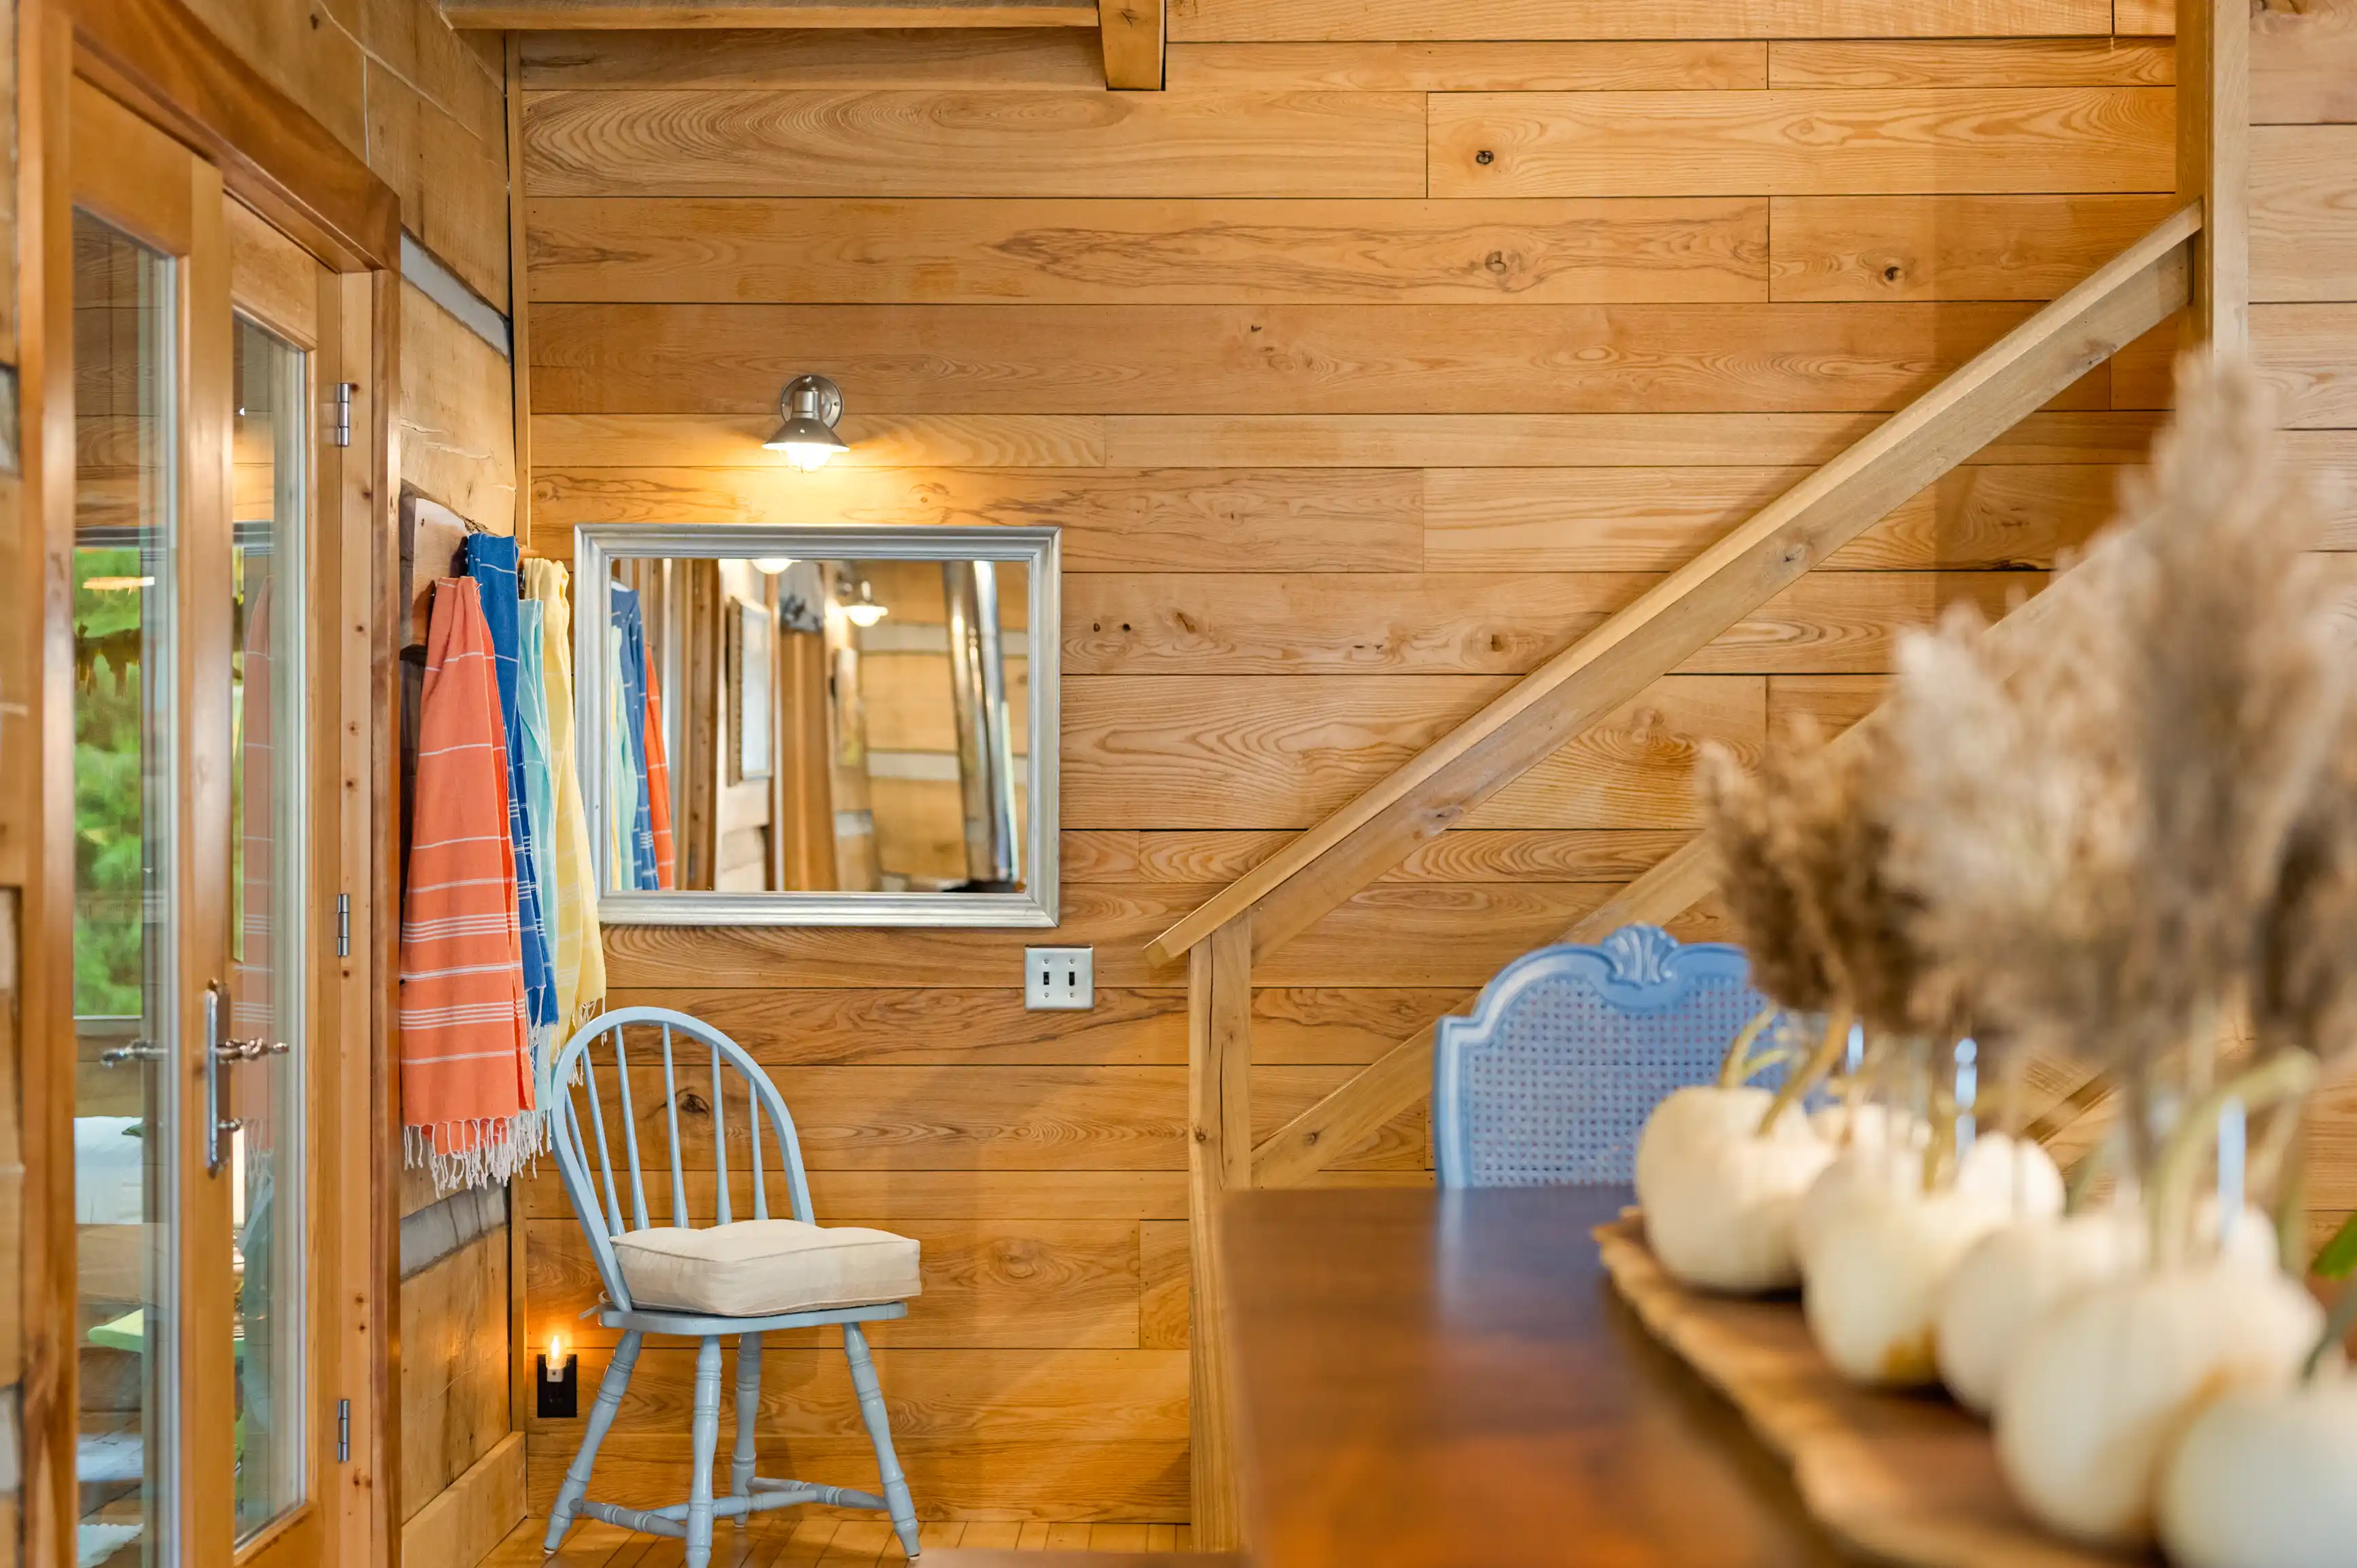 Cozy wooden cabin interior with a staircase, decorative white pumpkins, dried pampas grass arrangement, and colorful towels hanging by the glass door.